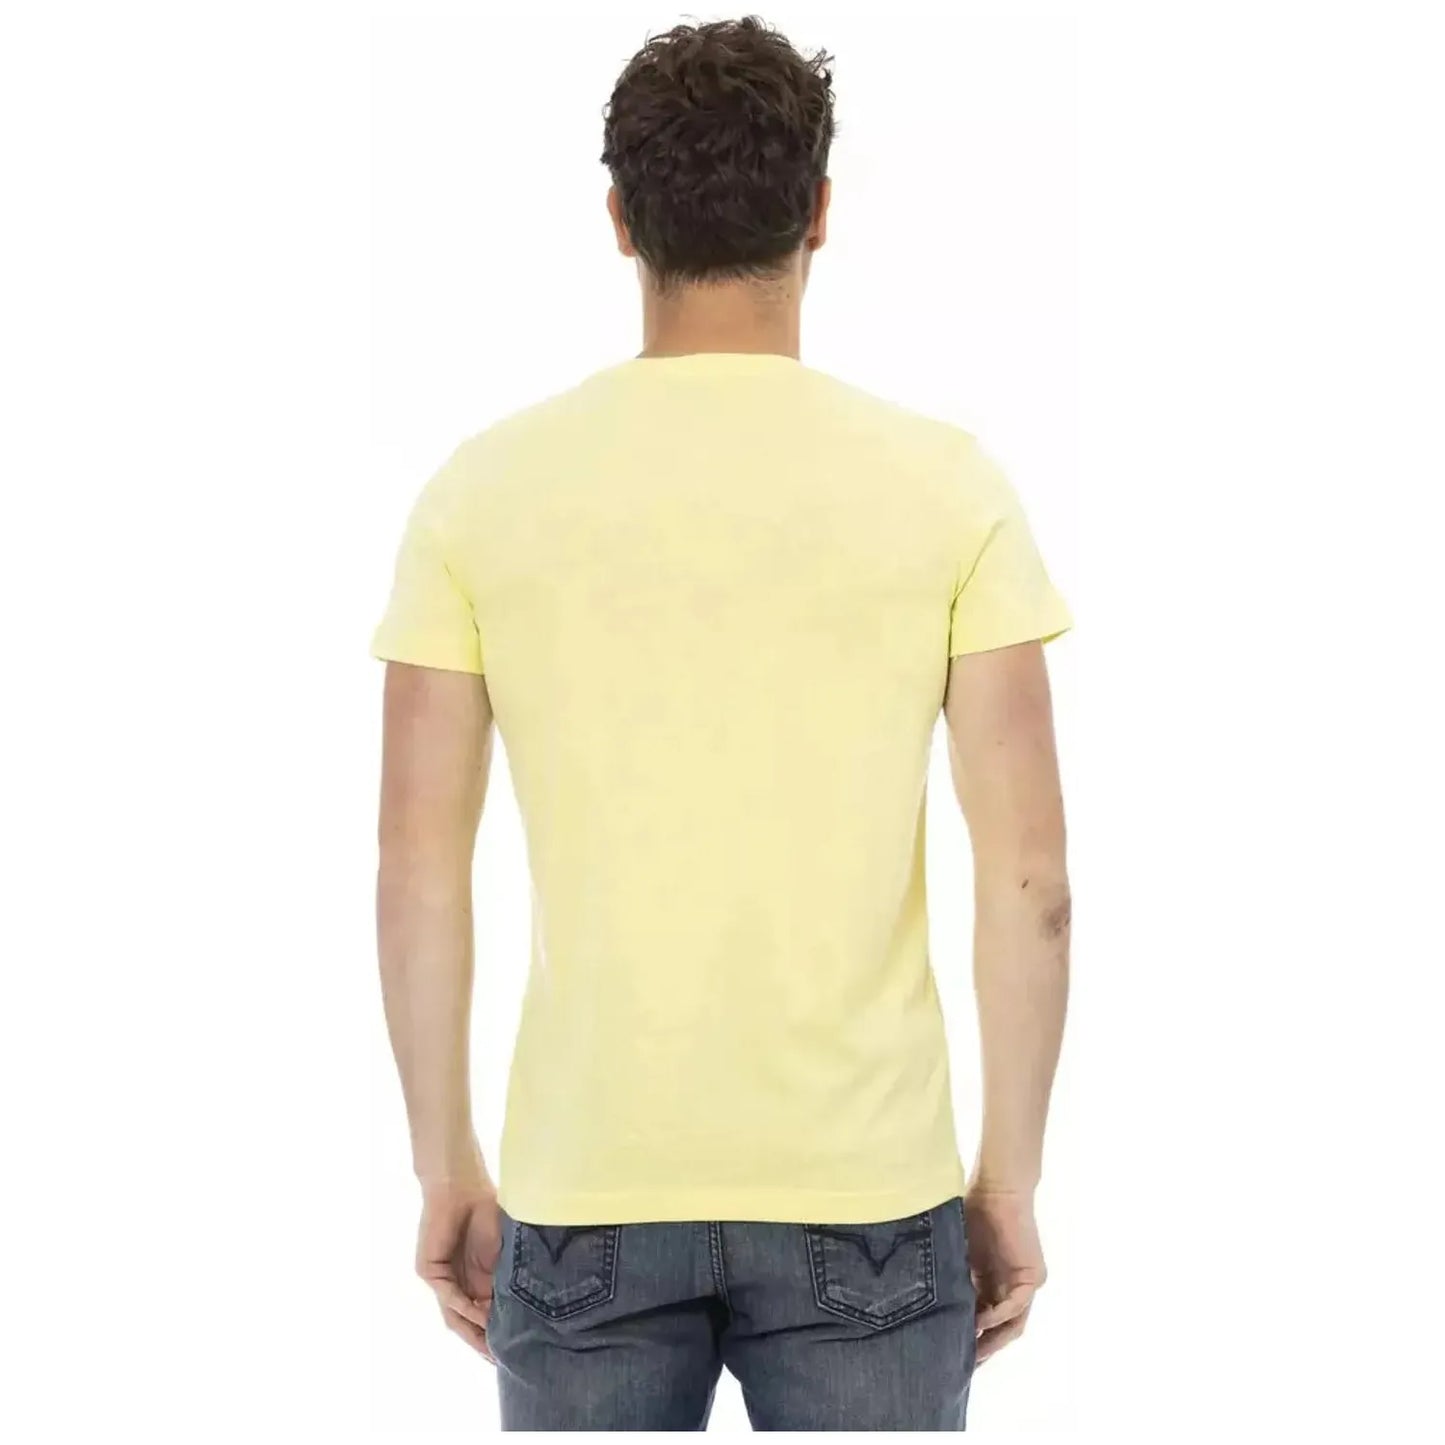 Trussardi Action Sunshine Yellow Casual Tee with Graphic Print yellow-cotton-t-shirt-13 product-22677-734713864-20-215fa7a7-ed8.webp